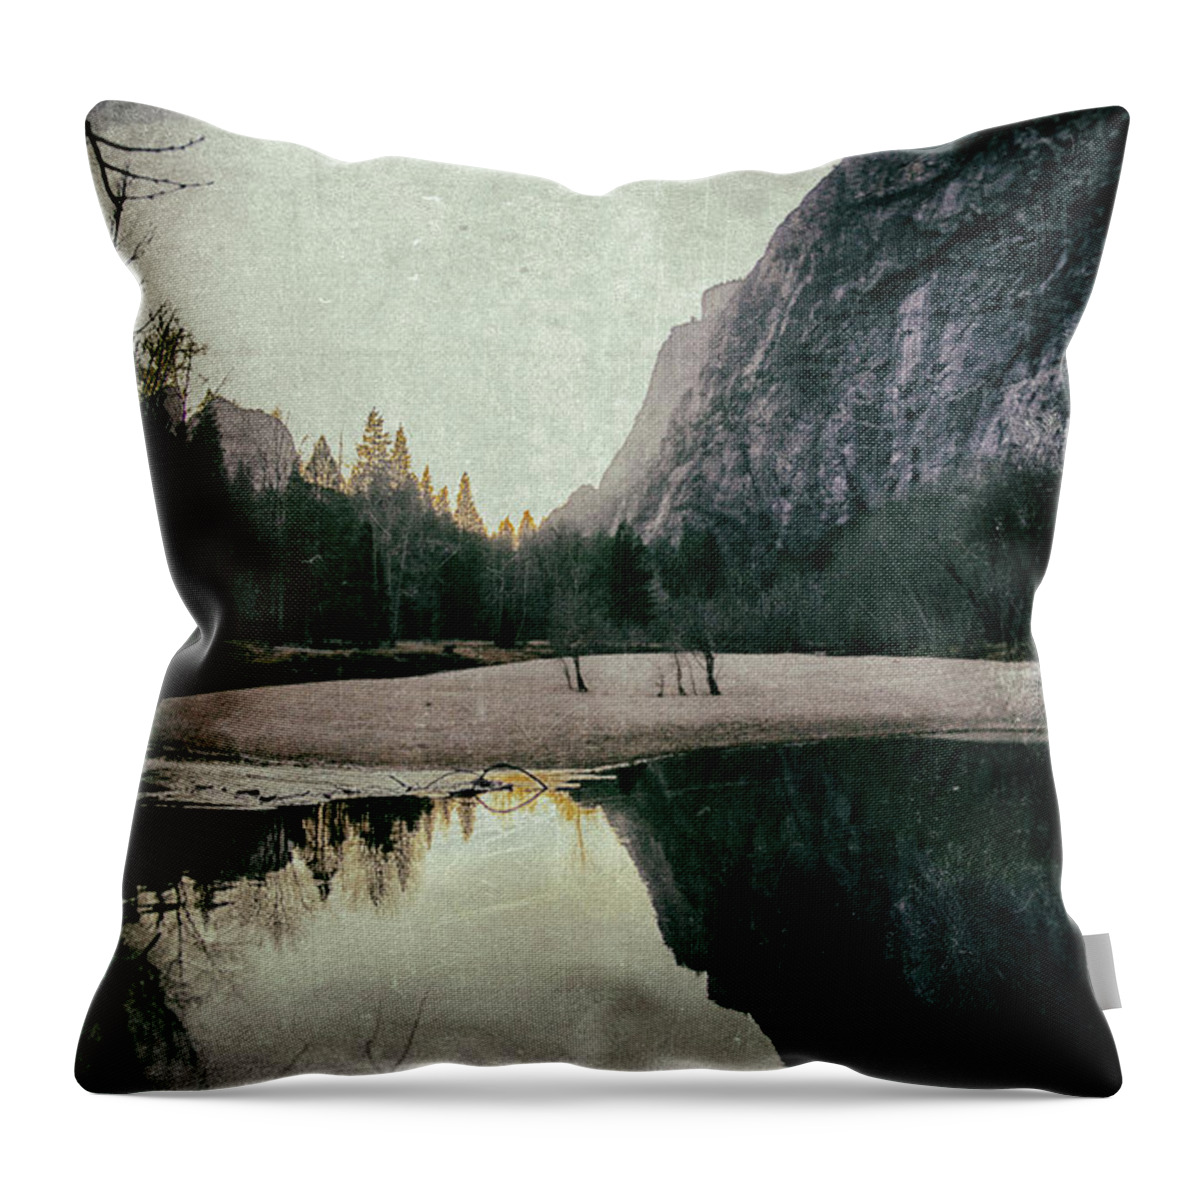 Yosemite Throw Pillow featuring the photograph Yosemite Valley Merced River by Lawrence Knutsson